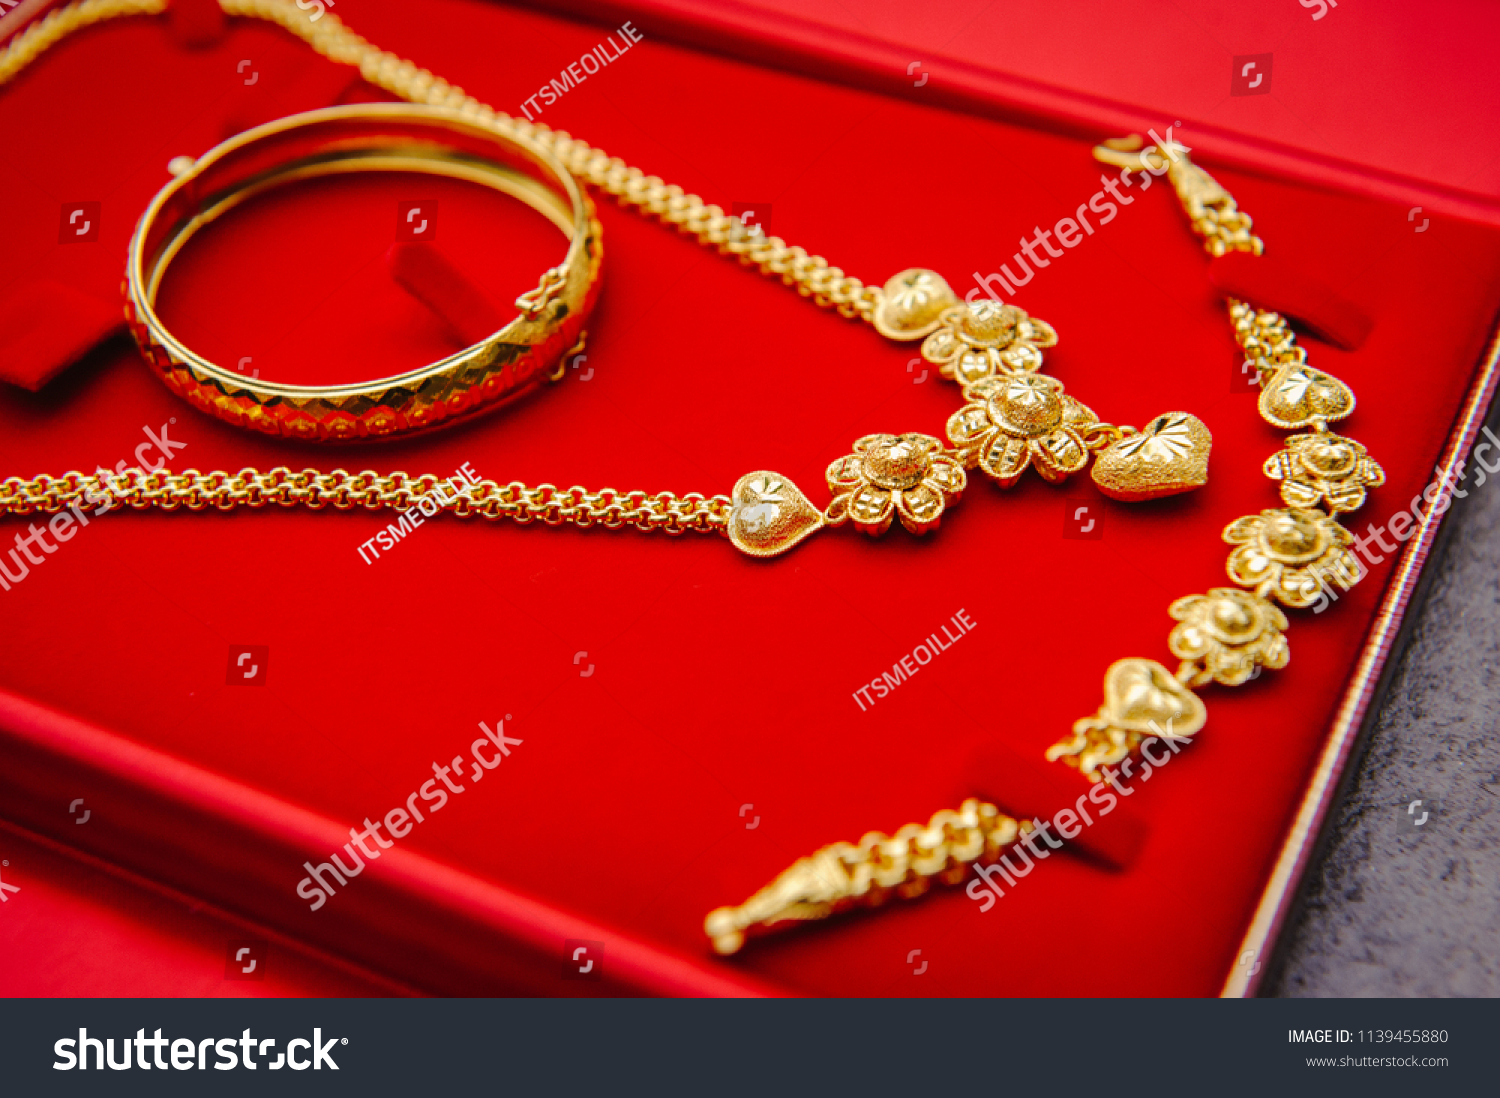 Download Gold Necklace Red Velvet Box Stock Photo Edit Now 1139455880 Yellowimages Mockups